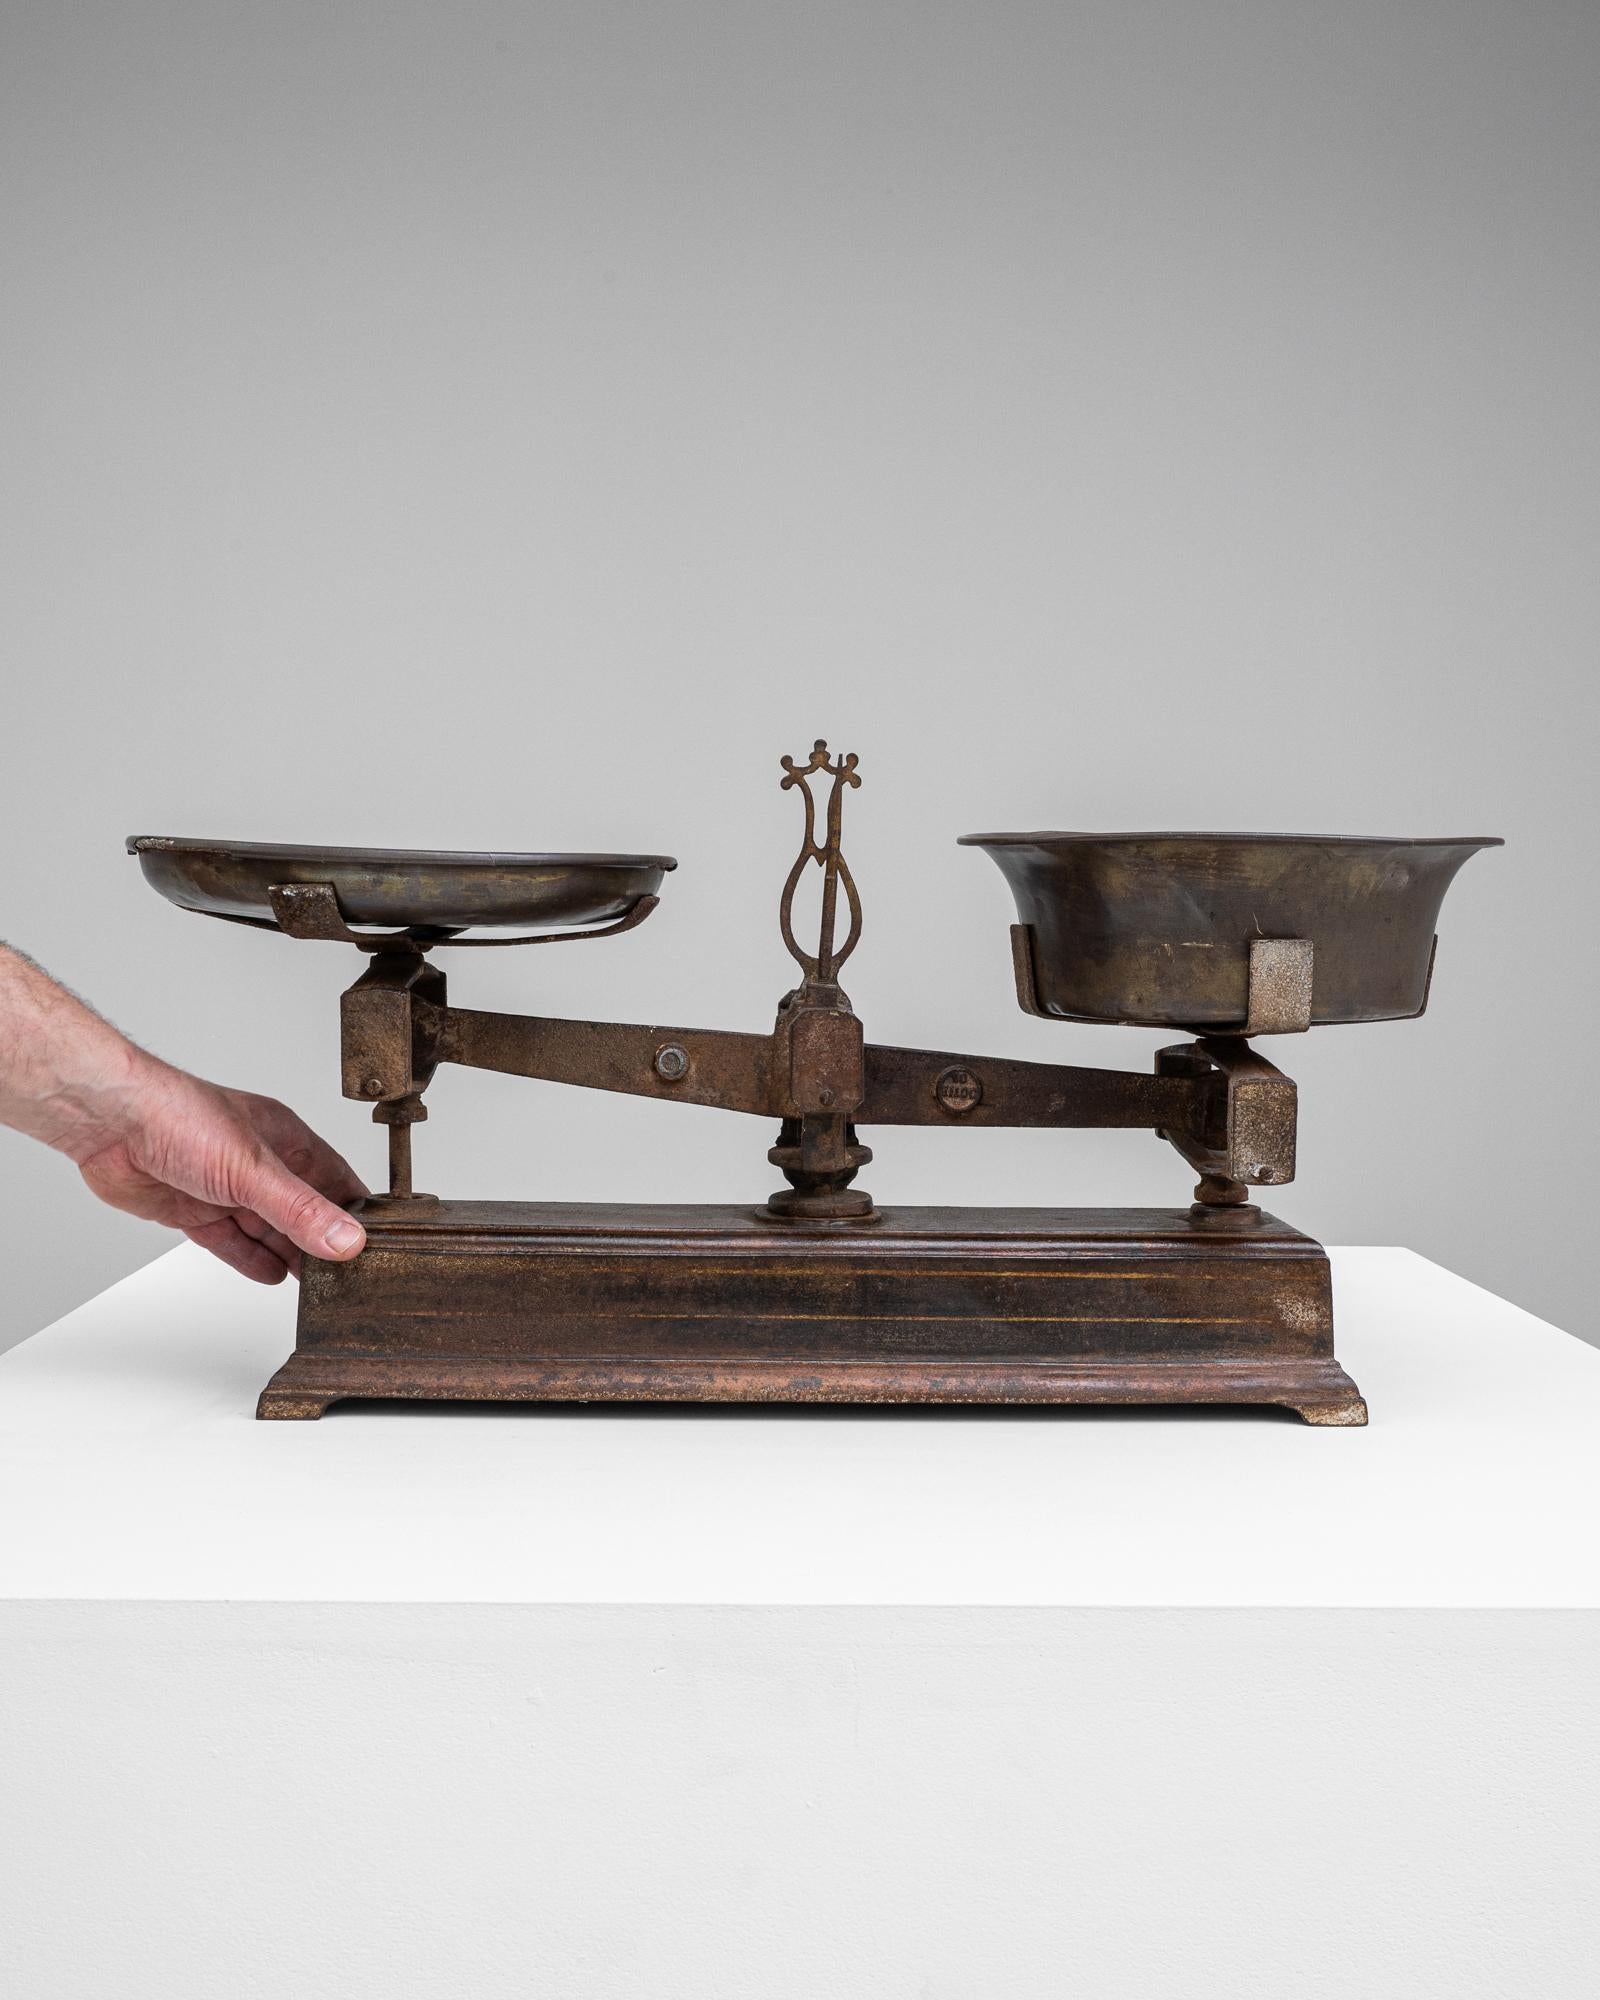 This distinguished 19th Century French Metal Scale is an emblem of the rich historical past, resonating with the tales of traditional marketplaces where it once played a pivotal role. The scale, with its robust wooden base and weathered metal bowls,